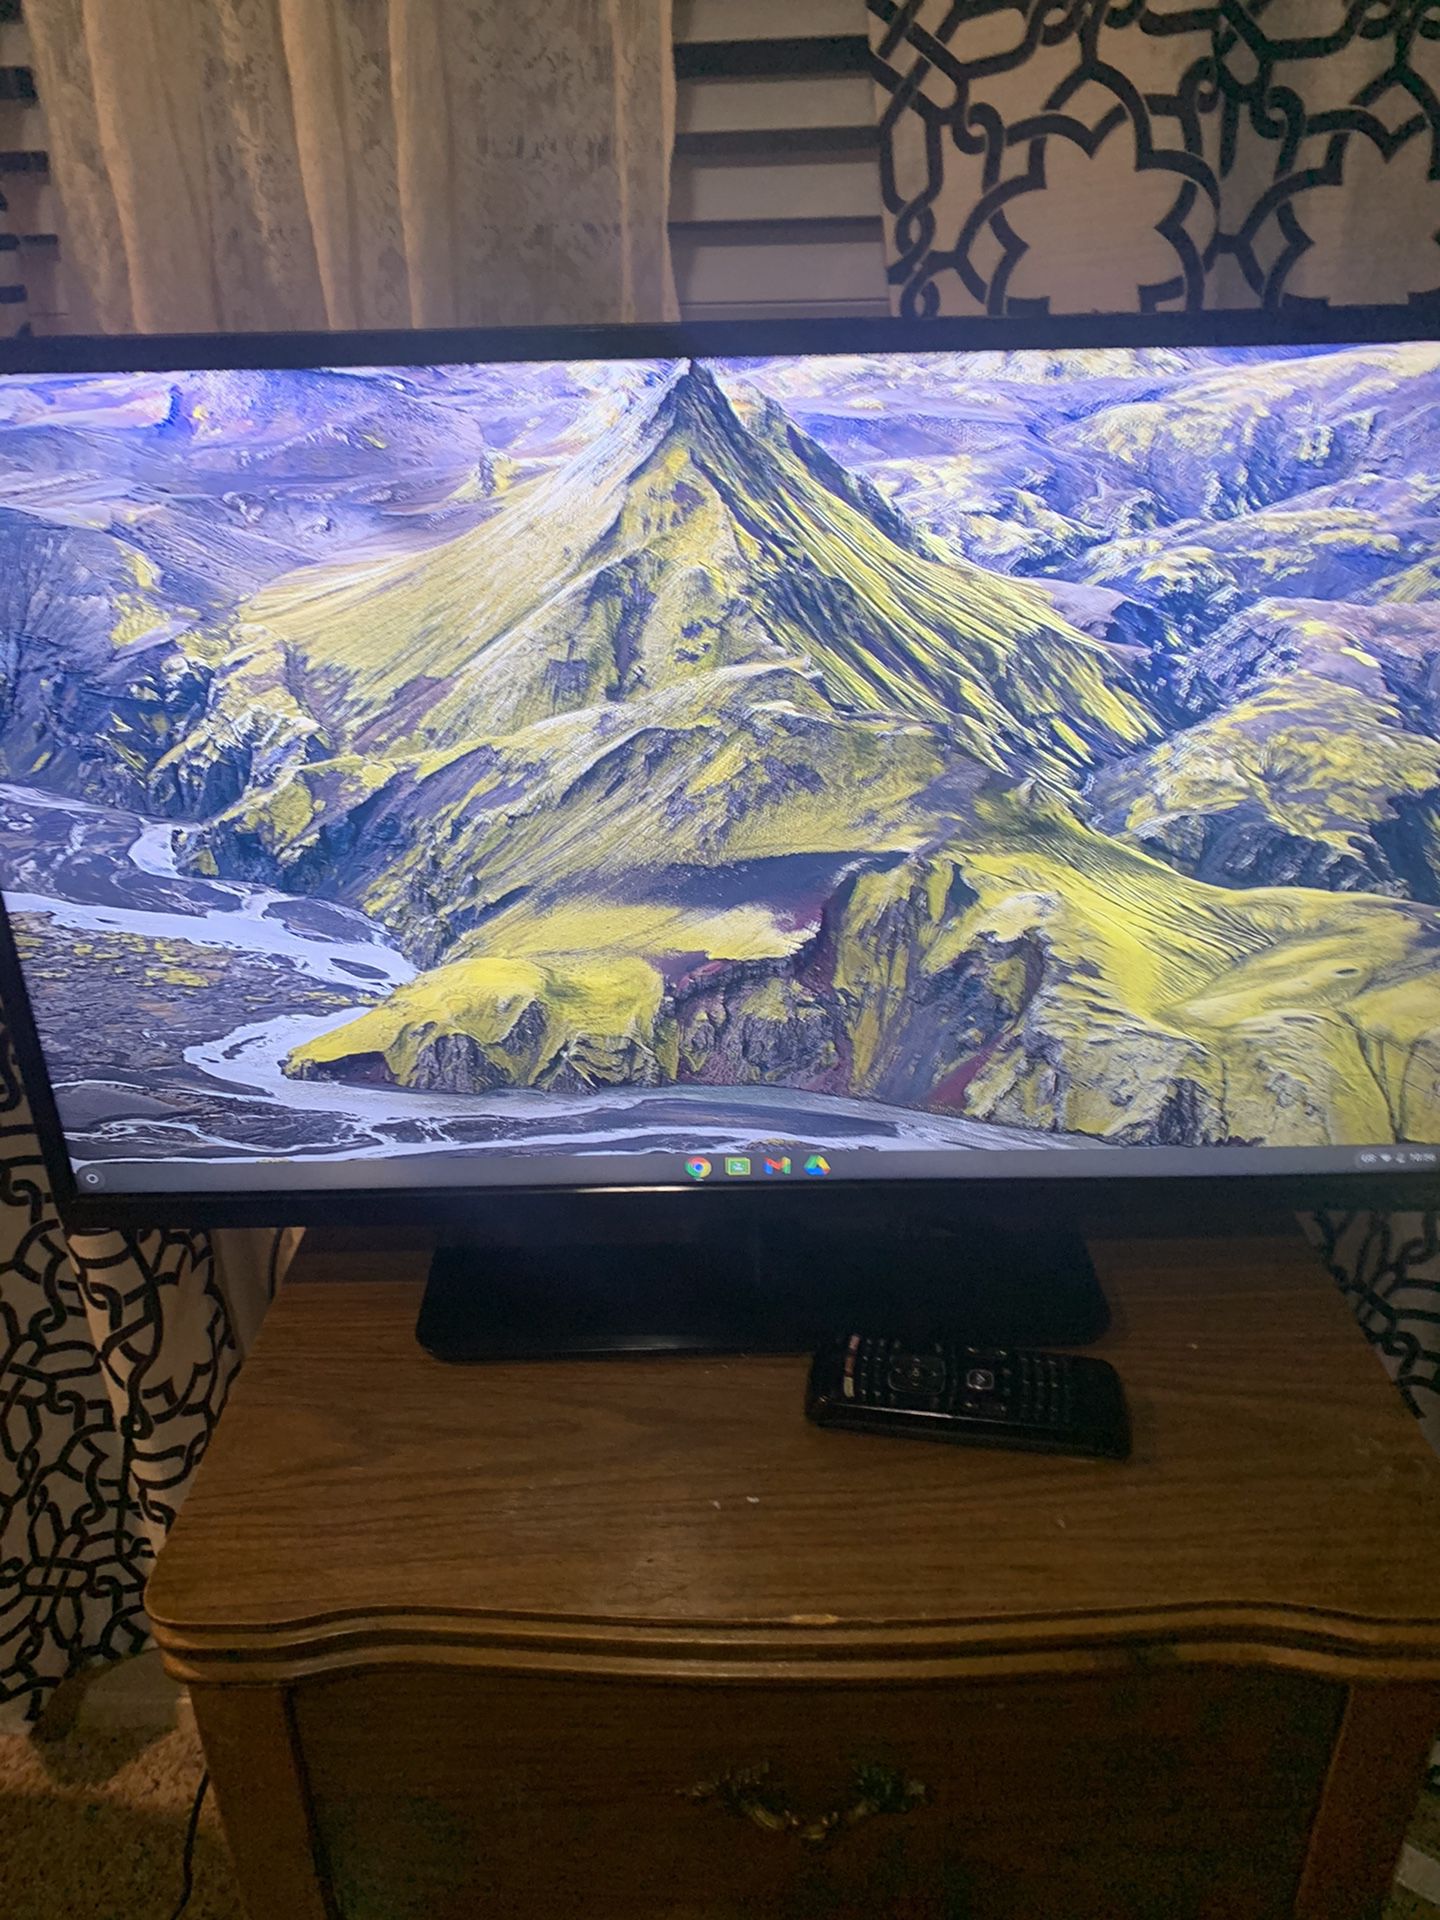 Vizio 32” LED TV no smart but it works good comes with a remote control